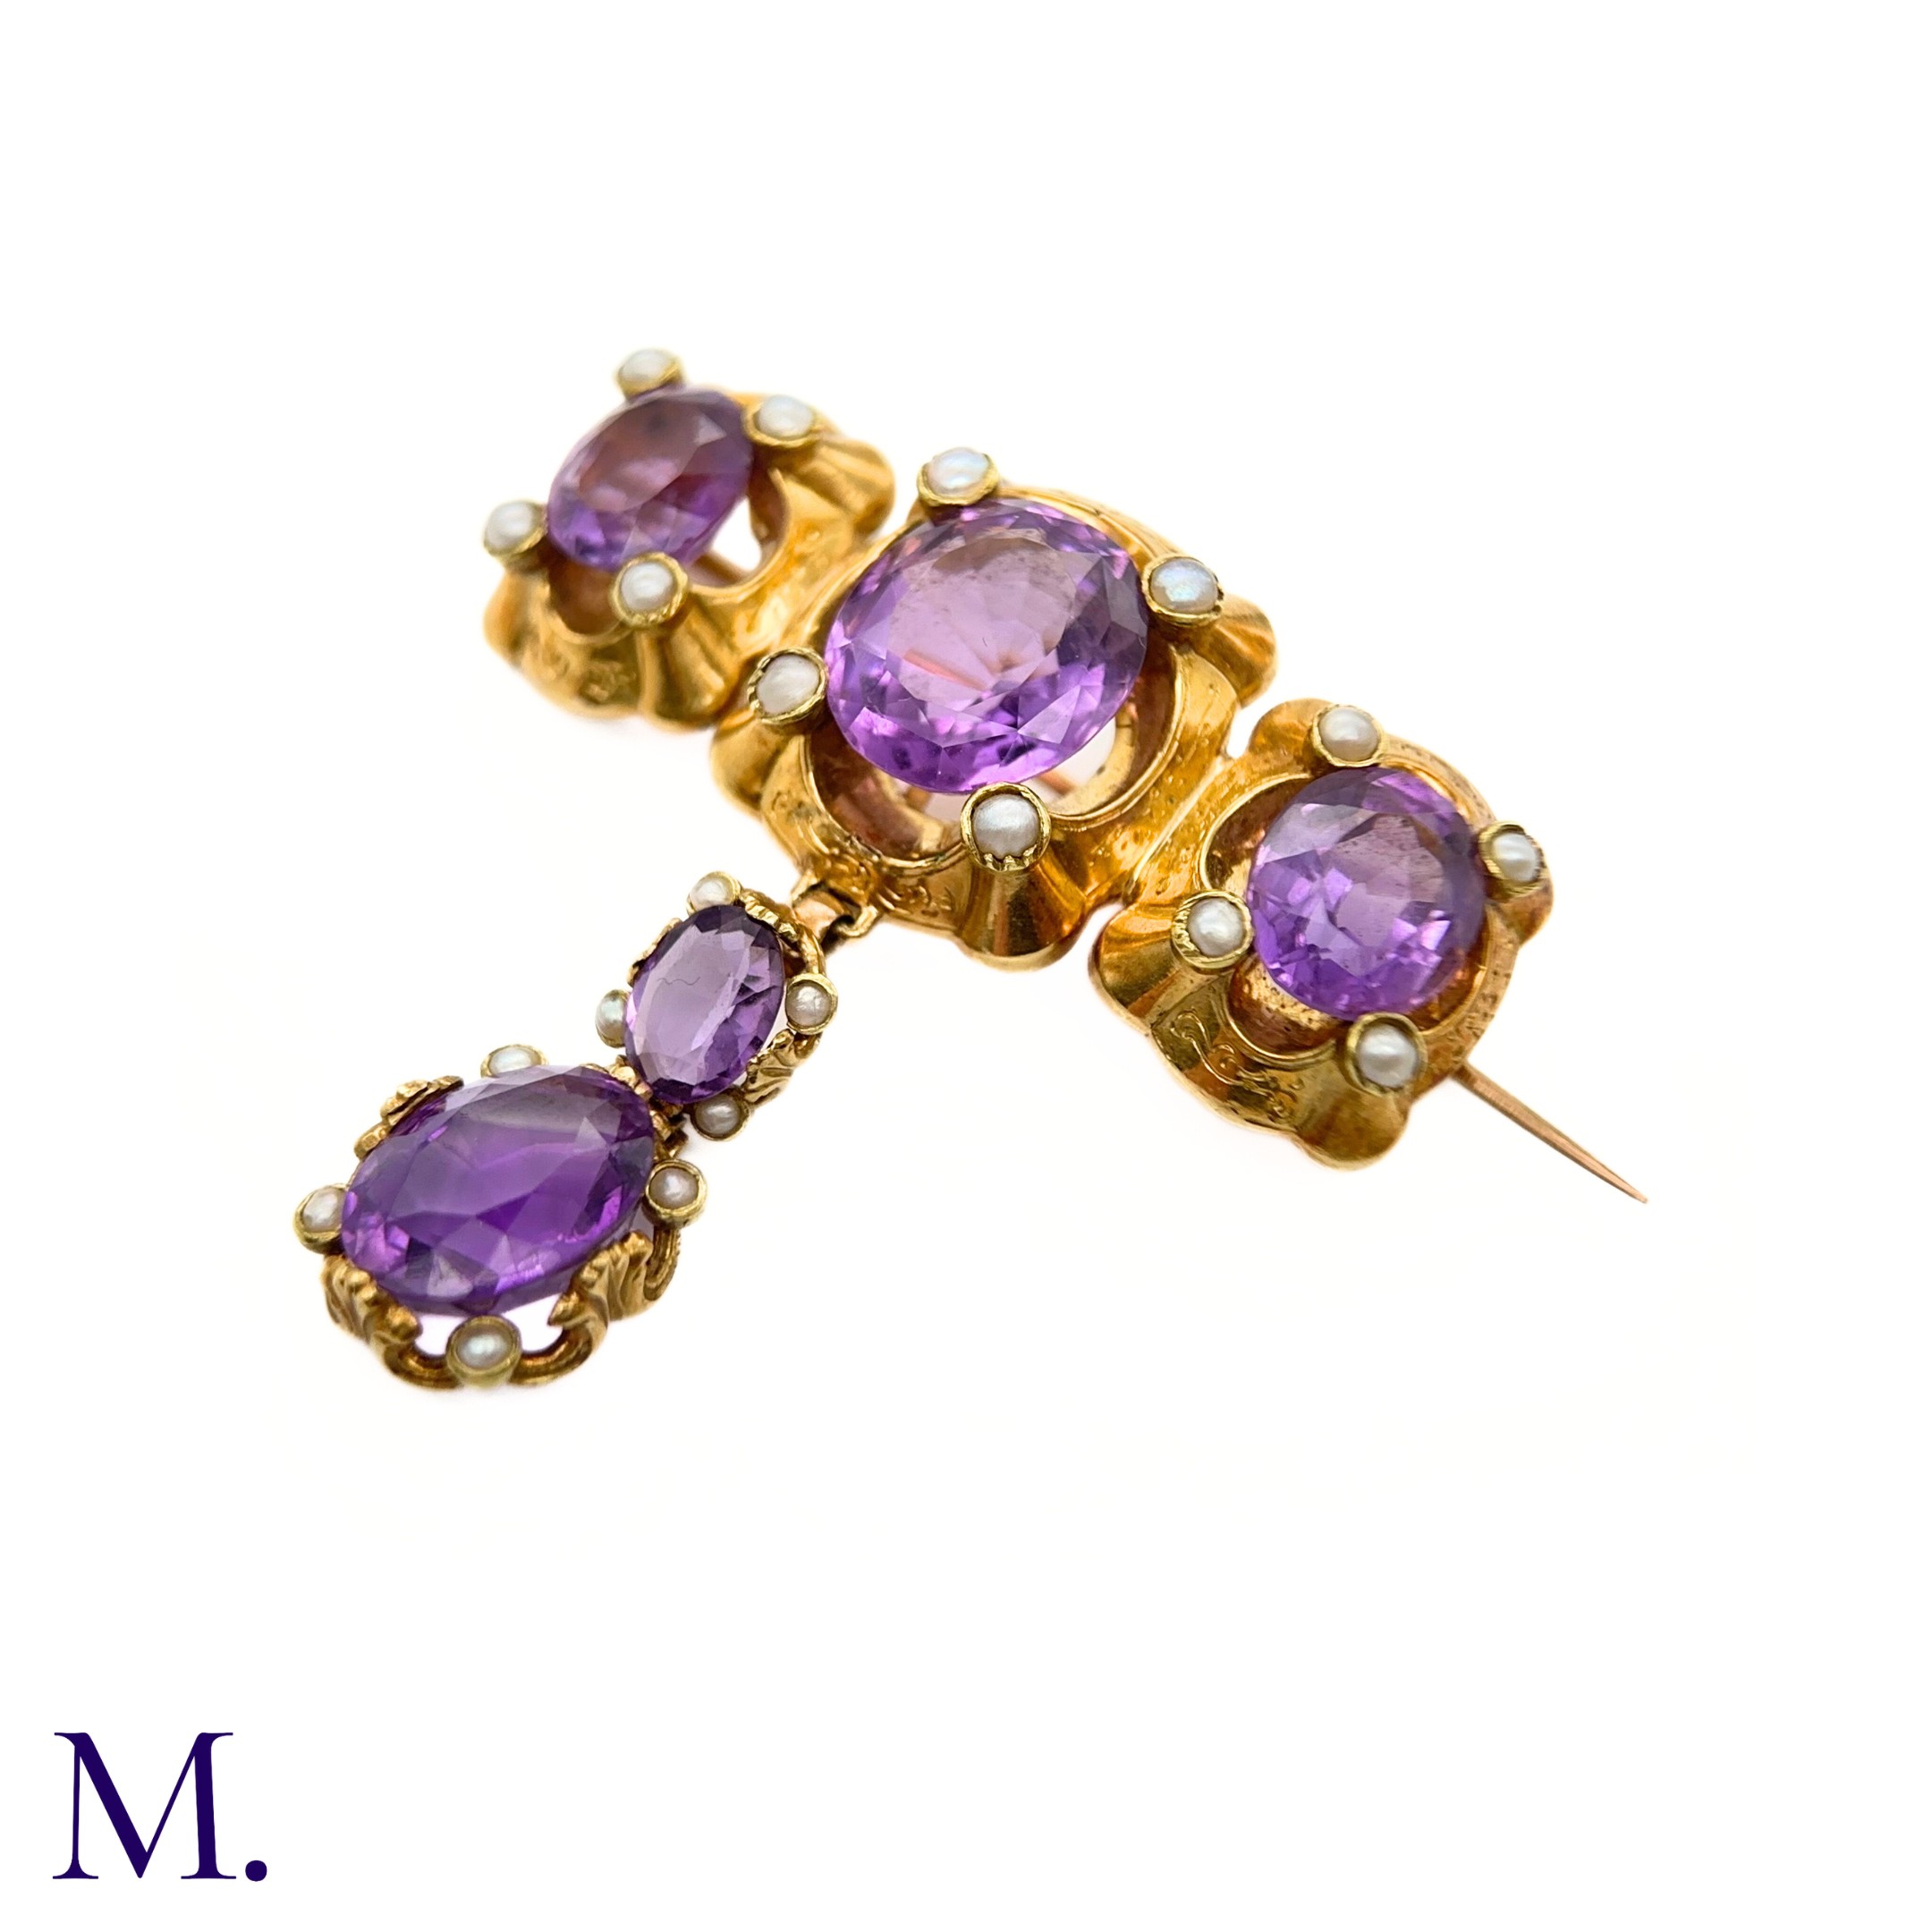 An Antique Amethyst and Pearl Drop Brooch - Image 5 of 6